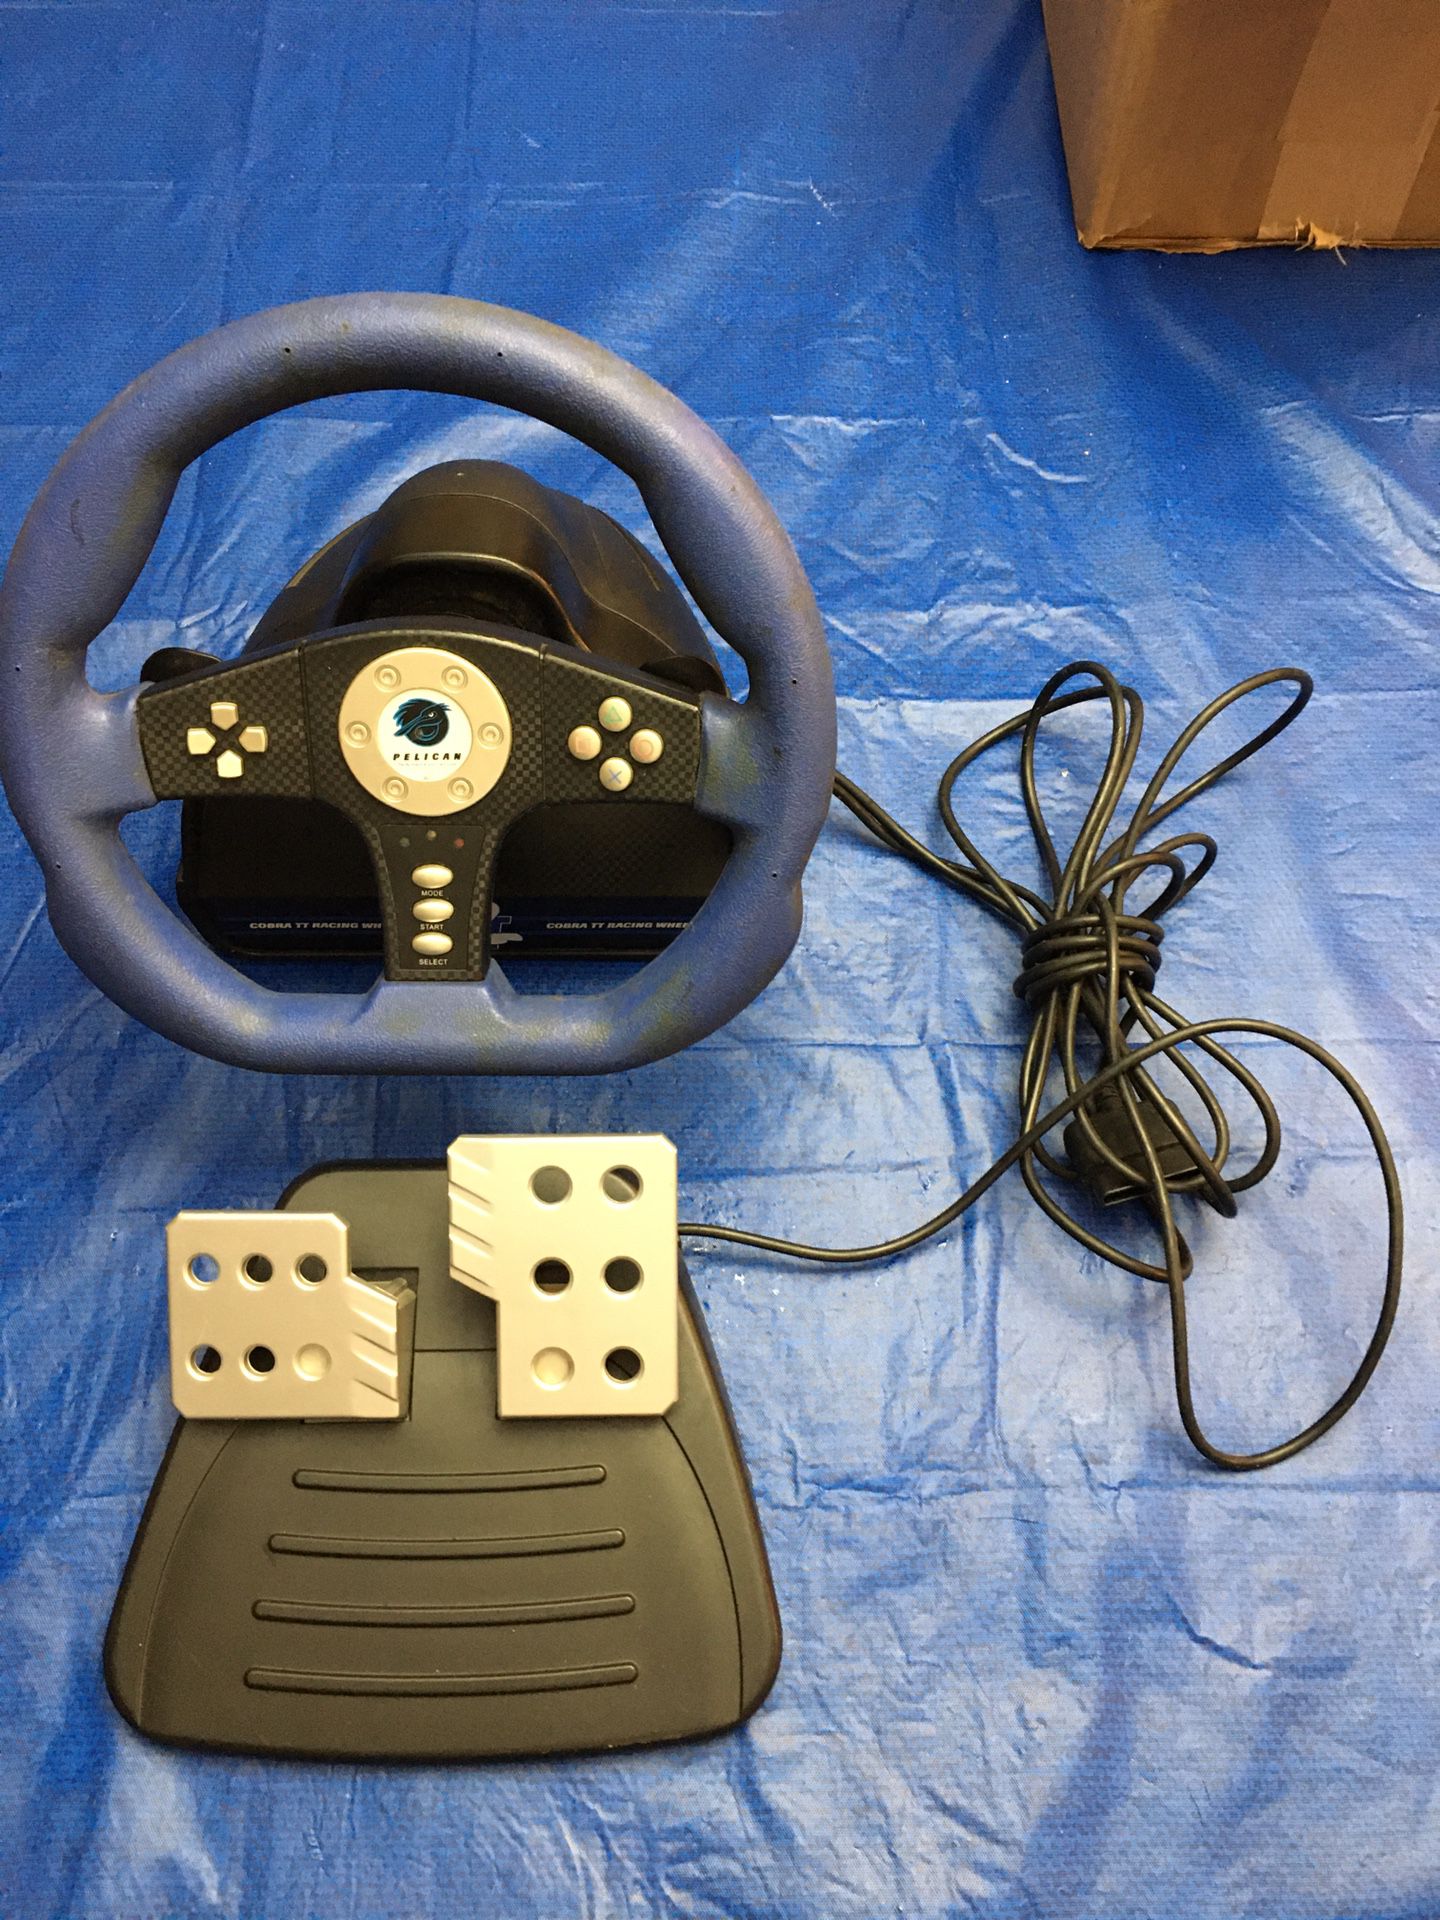 Pelican Playstation 2 PS2 Cobra TT Racing Steering Wheel Controller Pedal Was told it works great. Great condition There is No refunds or no returns